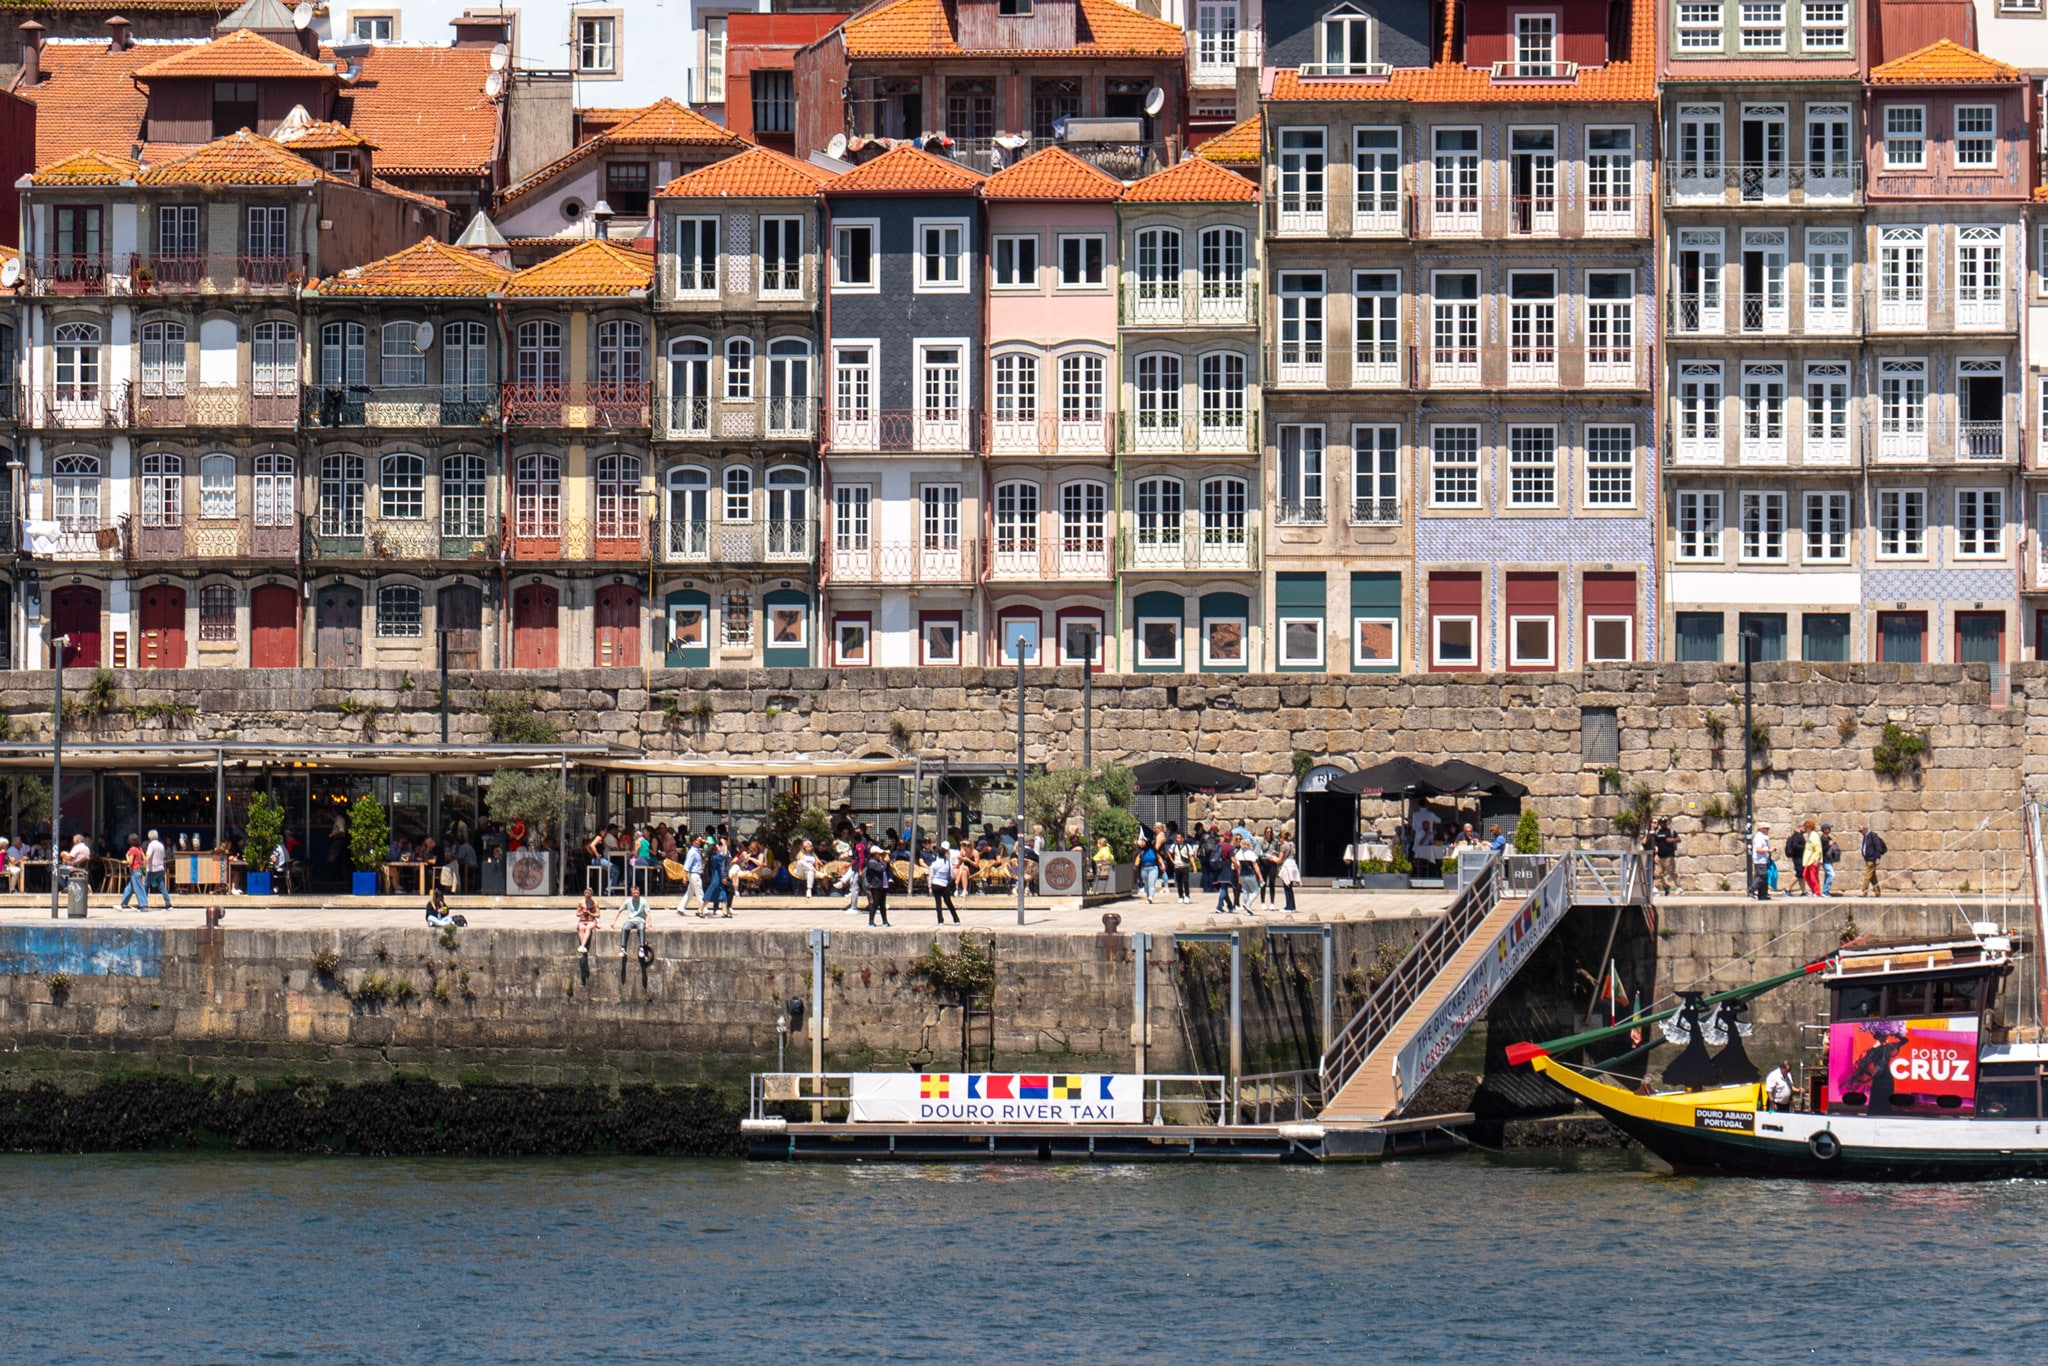 Porto is one of Europe's best food cities